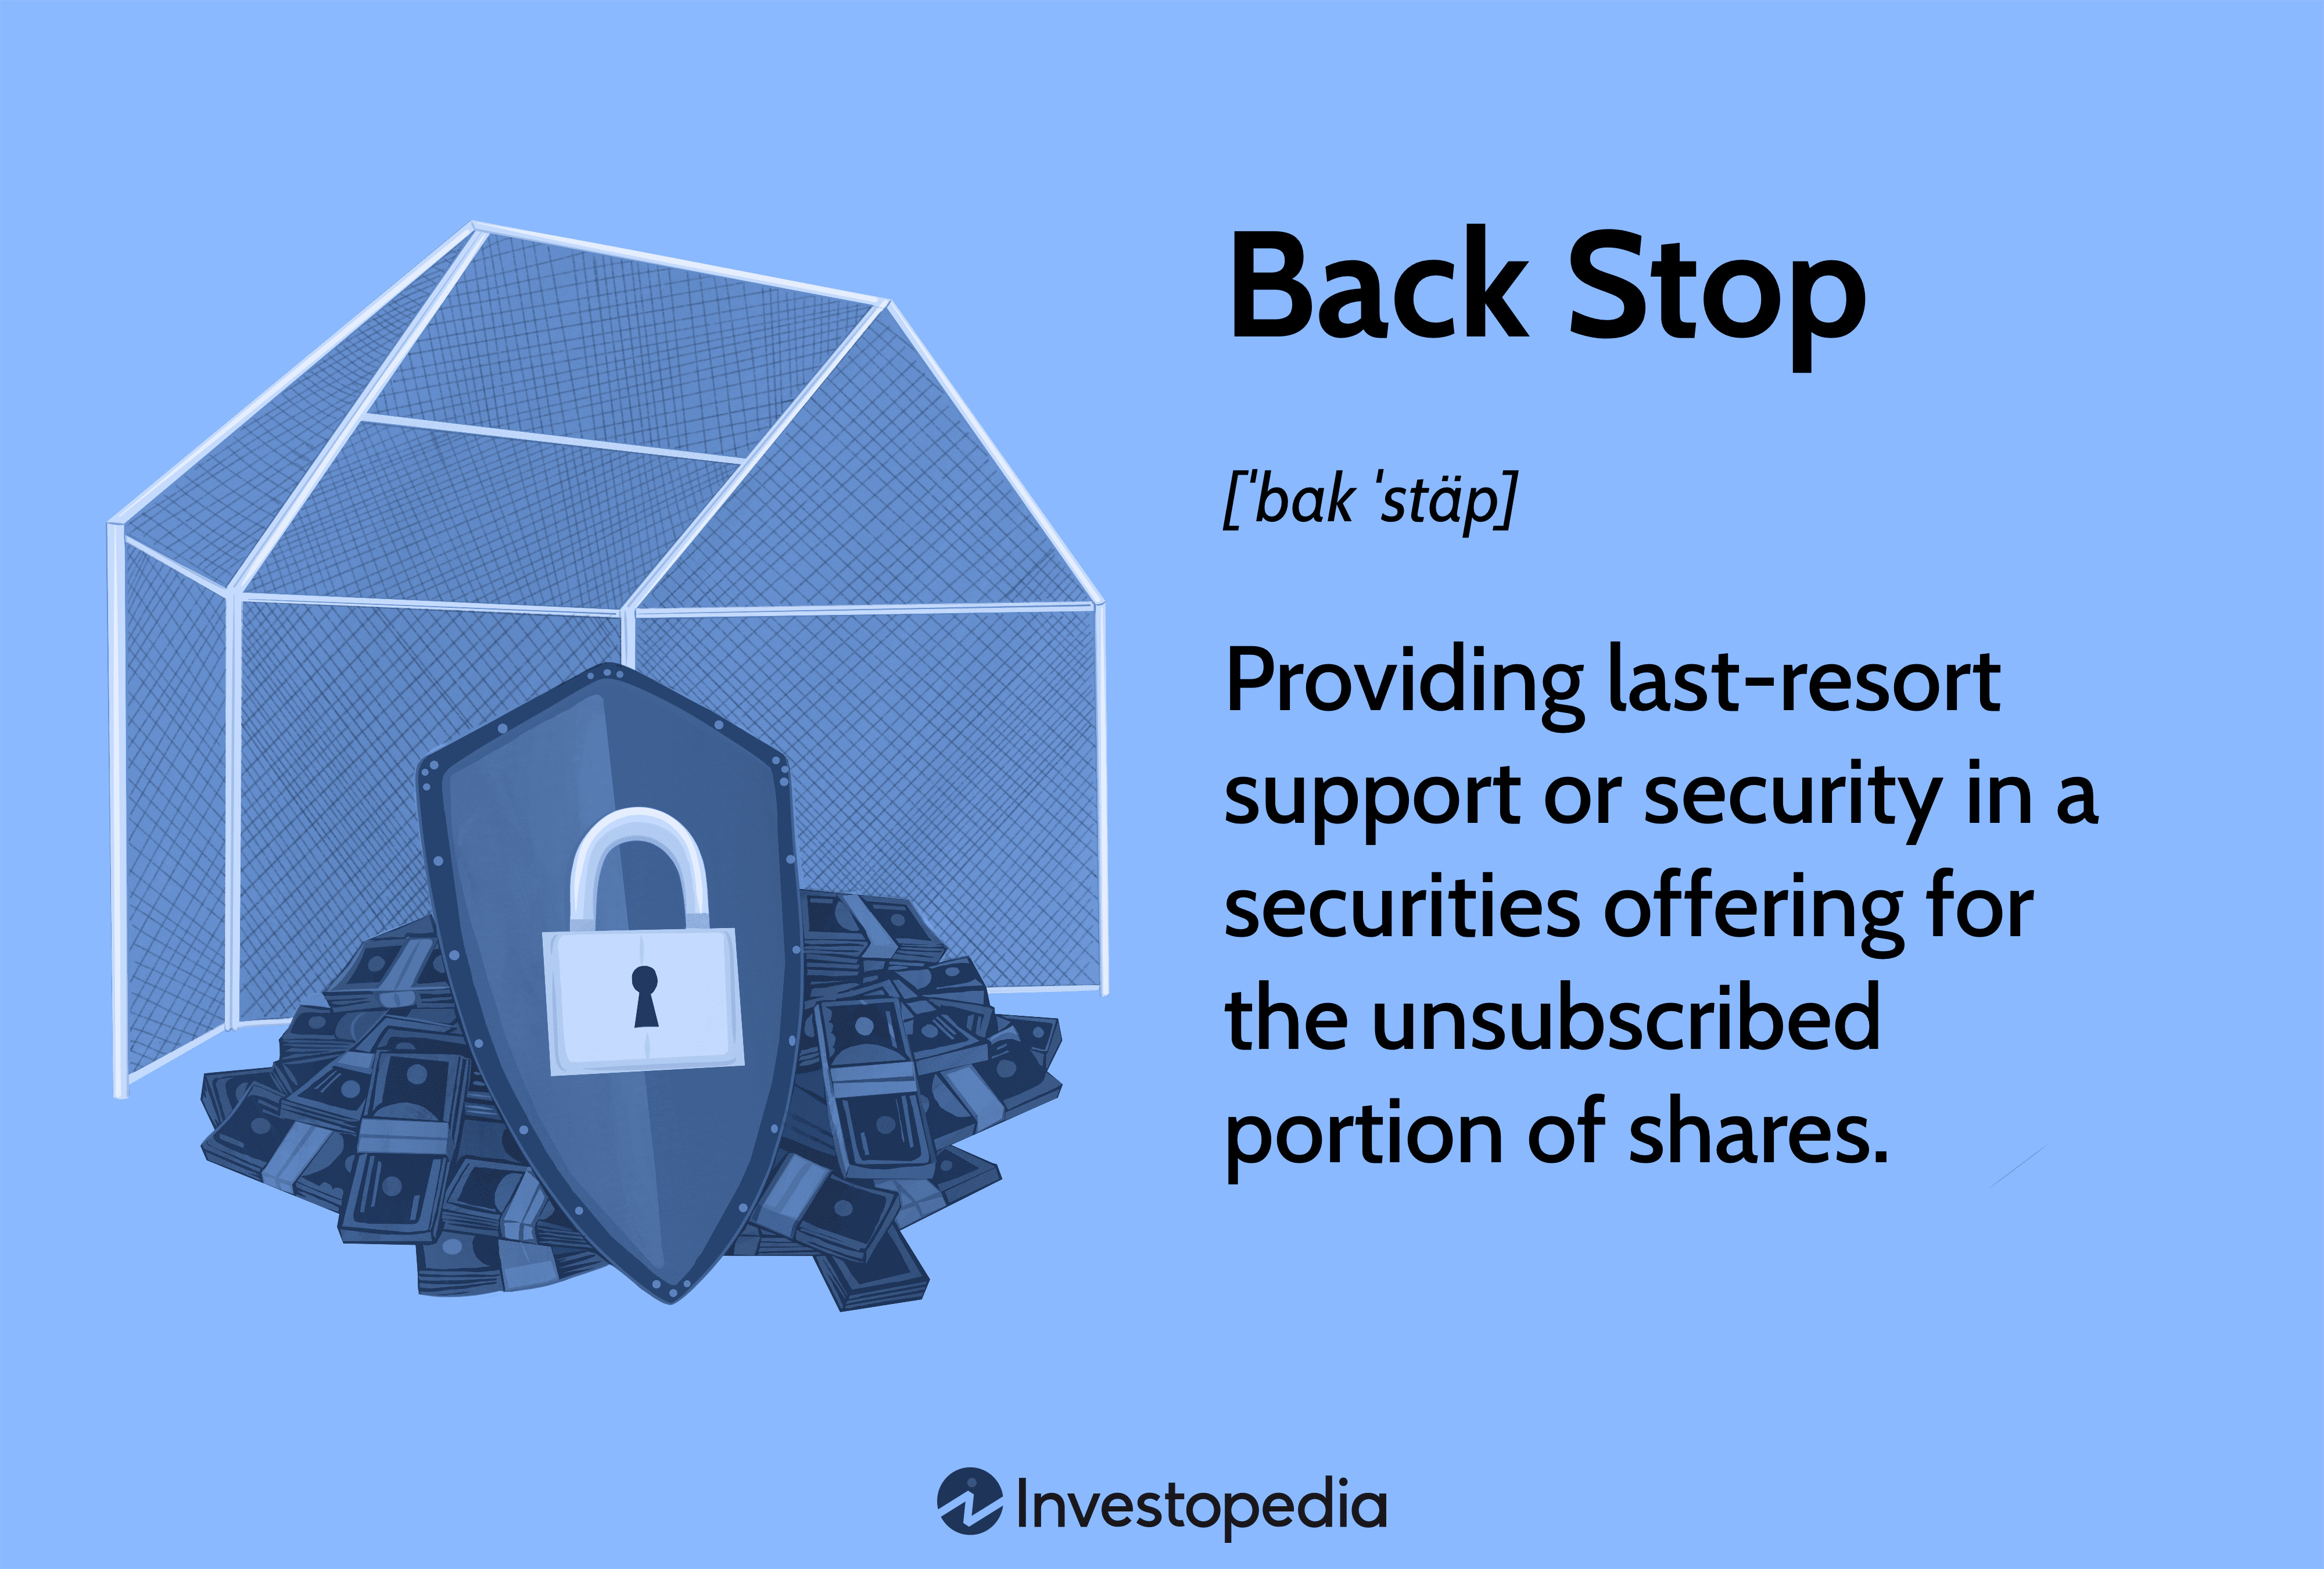 Back Stop: Providing last-resort support or security in a securities offering for the unsubscribed portion of shares.